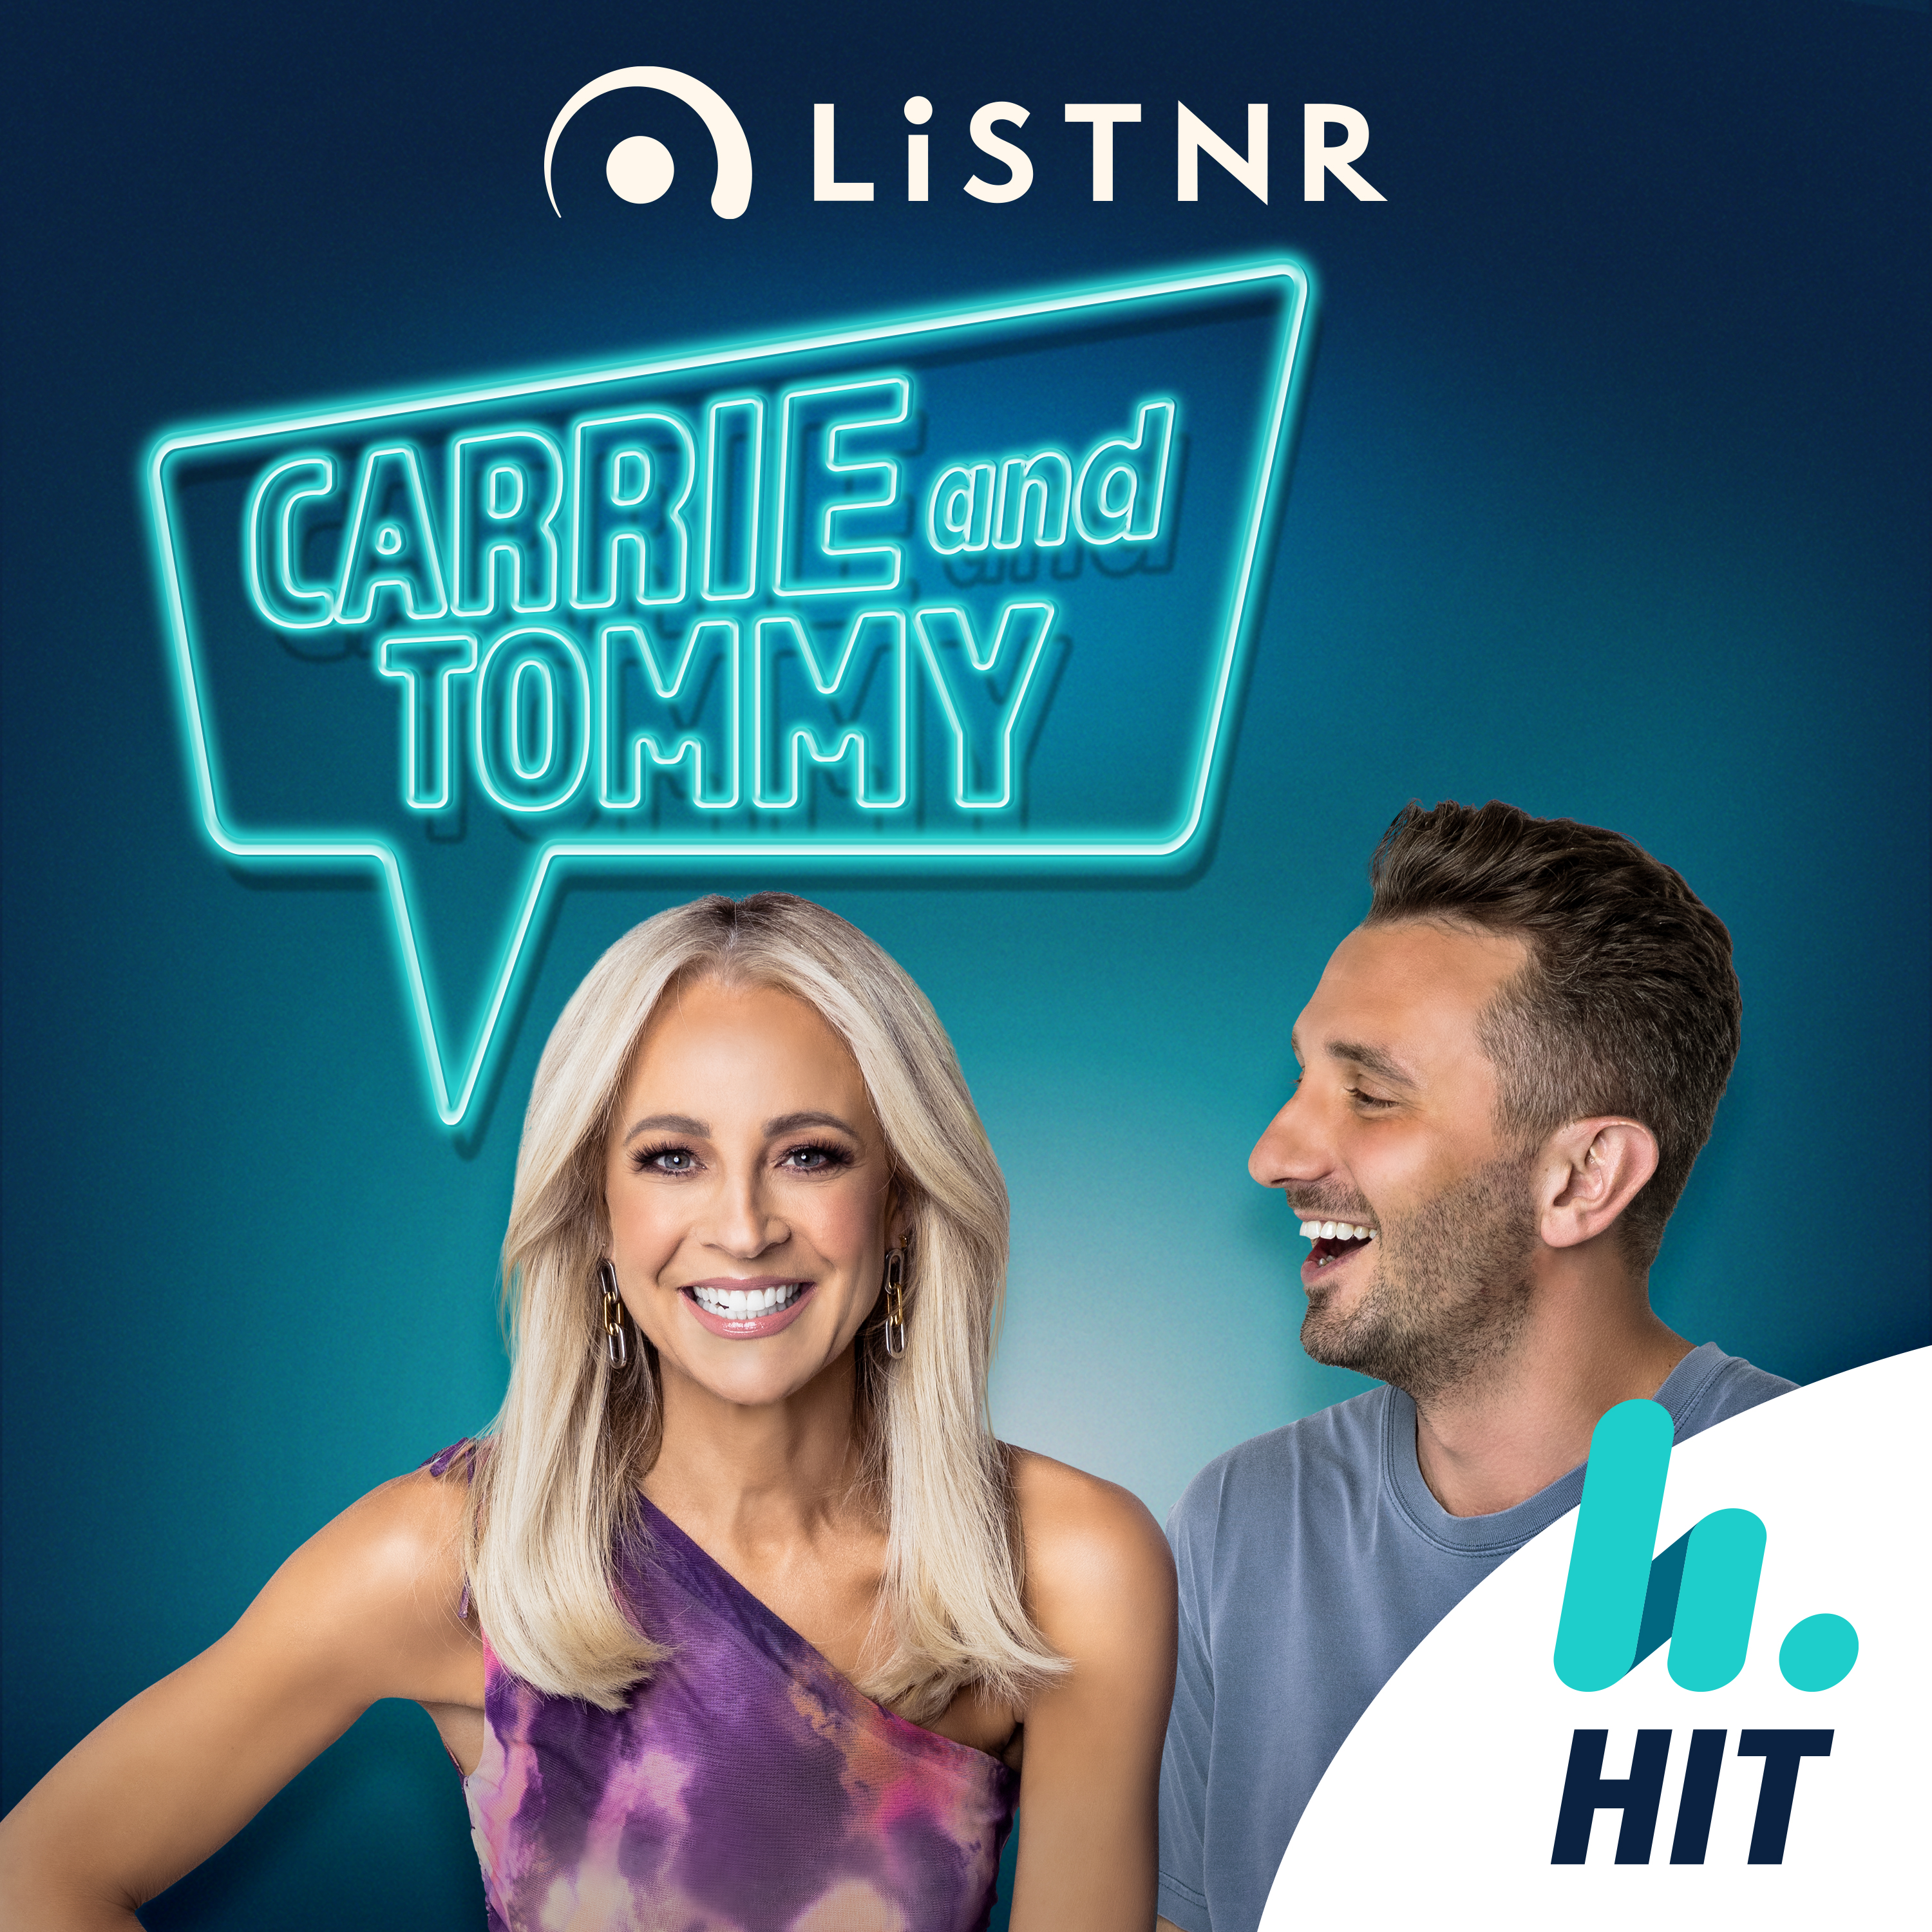 Tommy's brush with a Porno, Carrie's brush with some shrooms and some epic DIY surgeries.